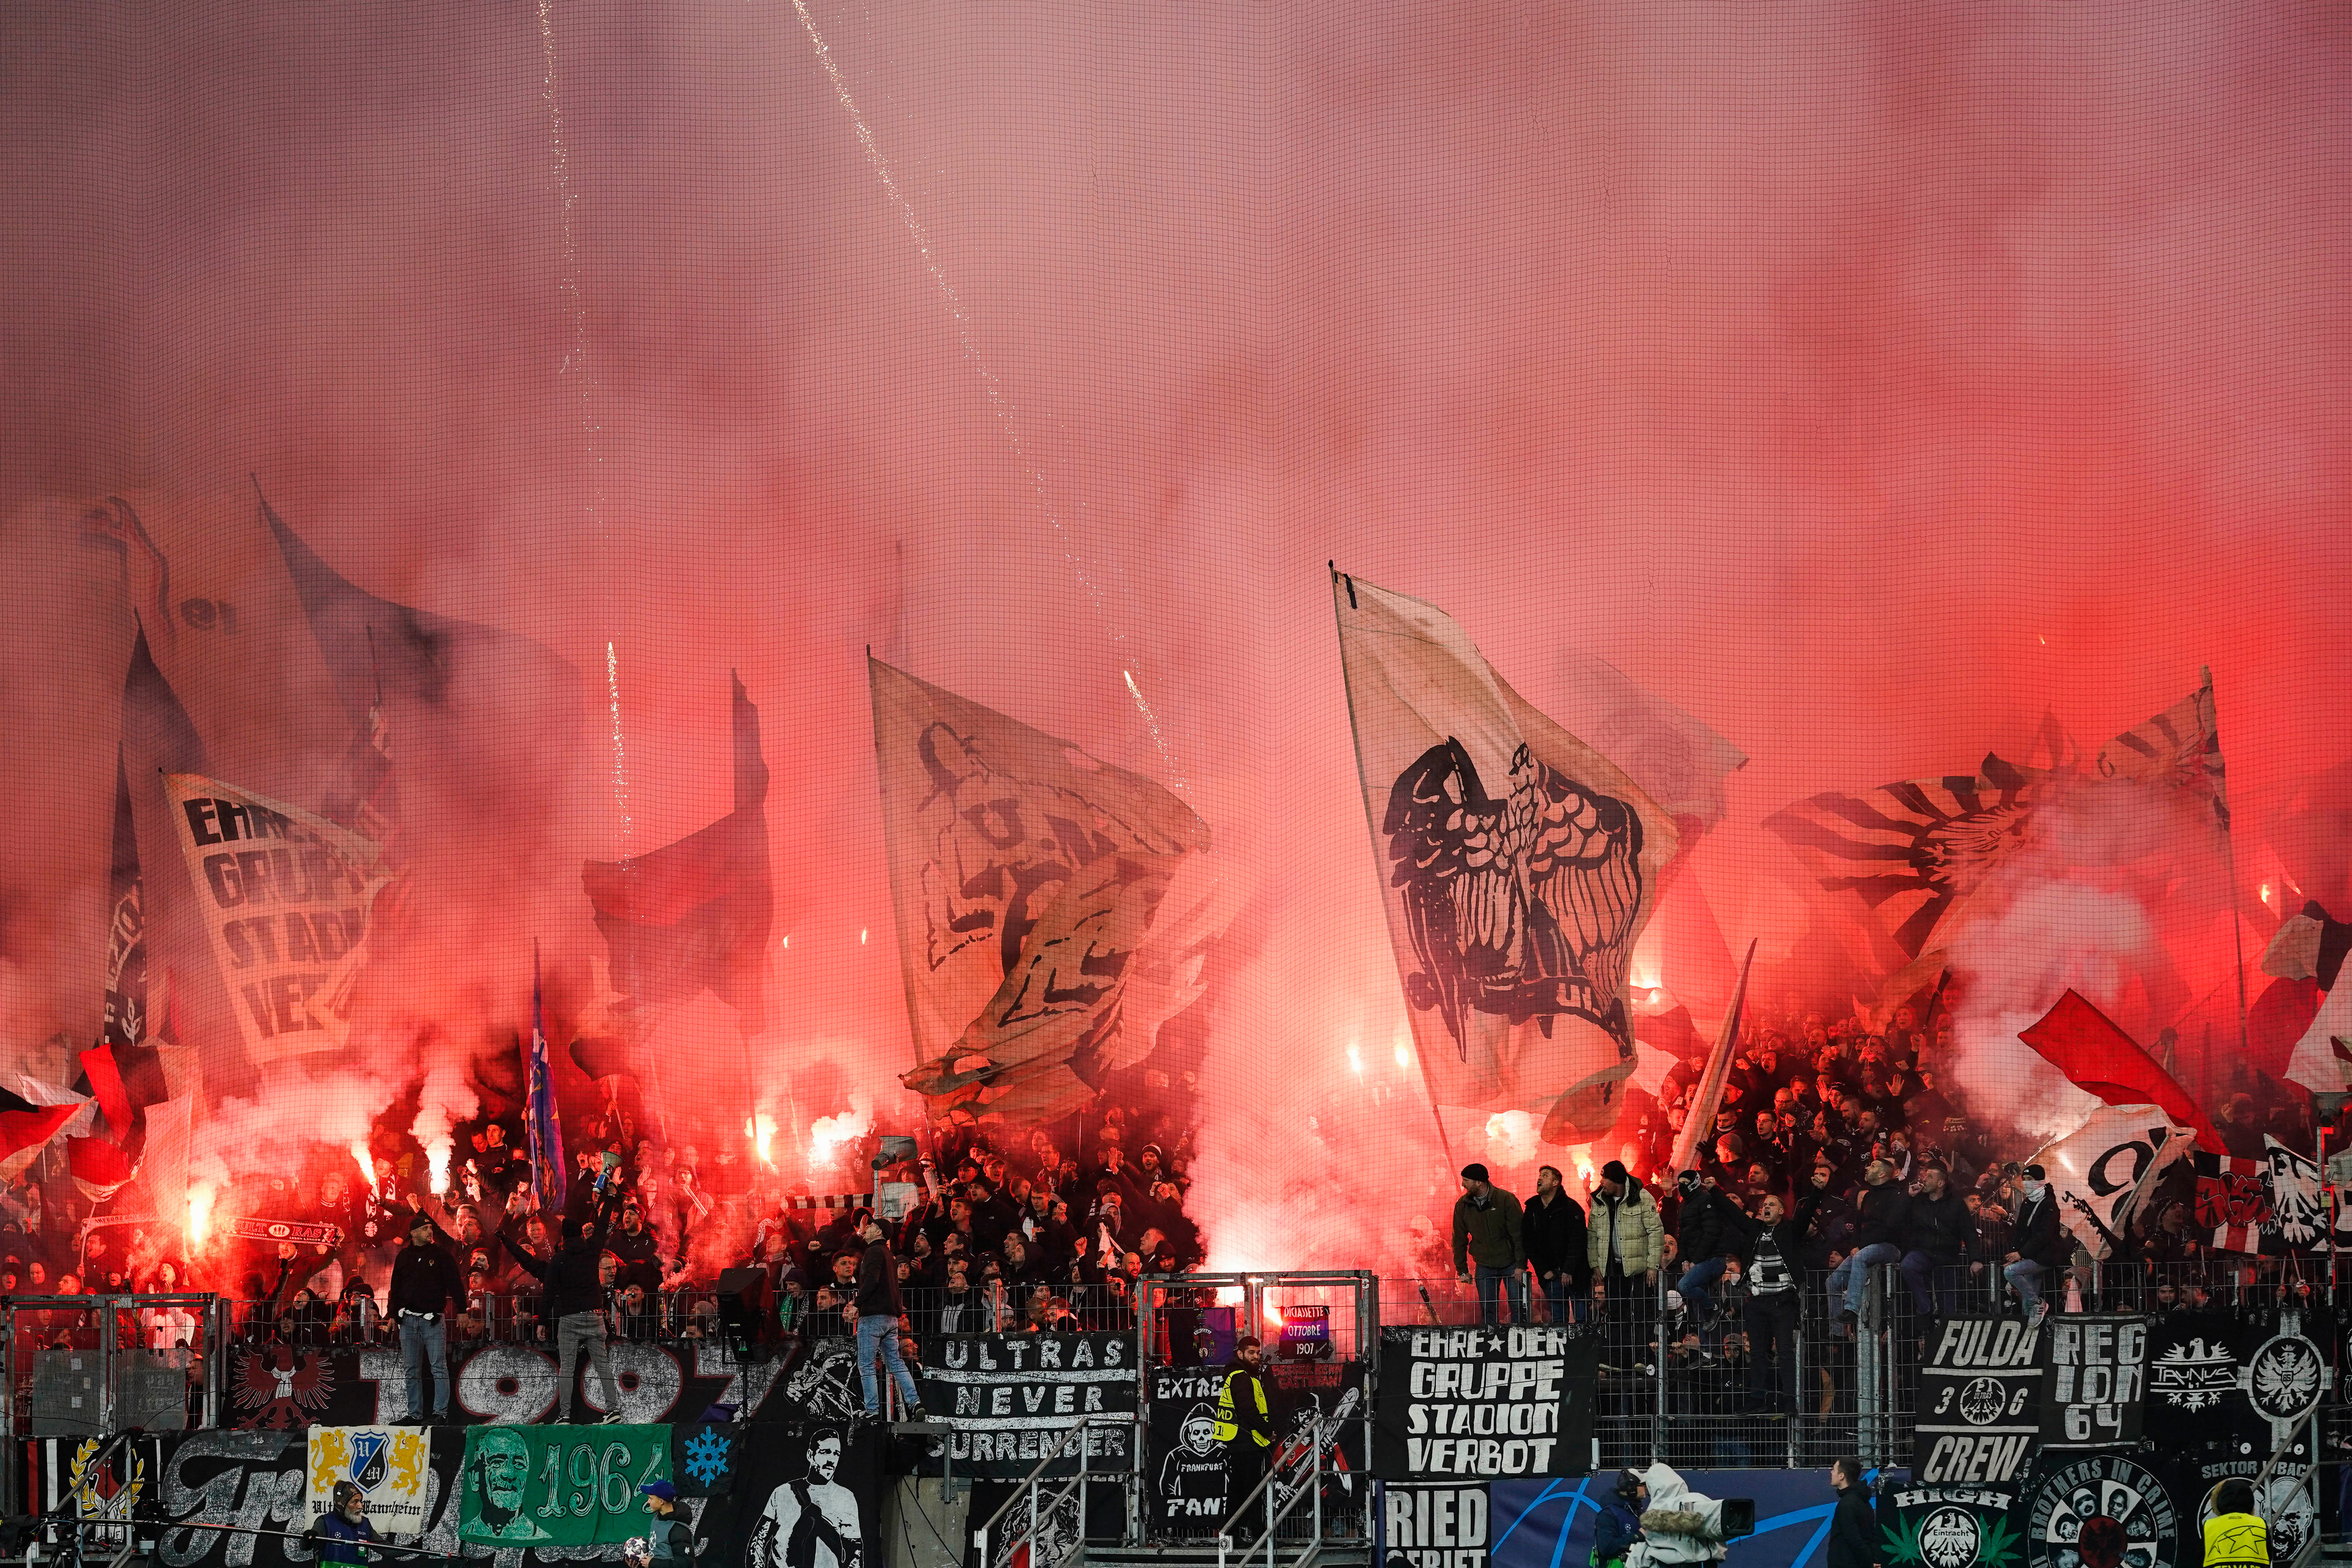 Eintracht Frankfurt fans in the first leg of the round of 16 match against Napoli in Germany.